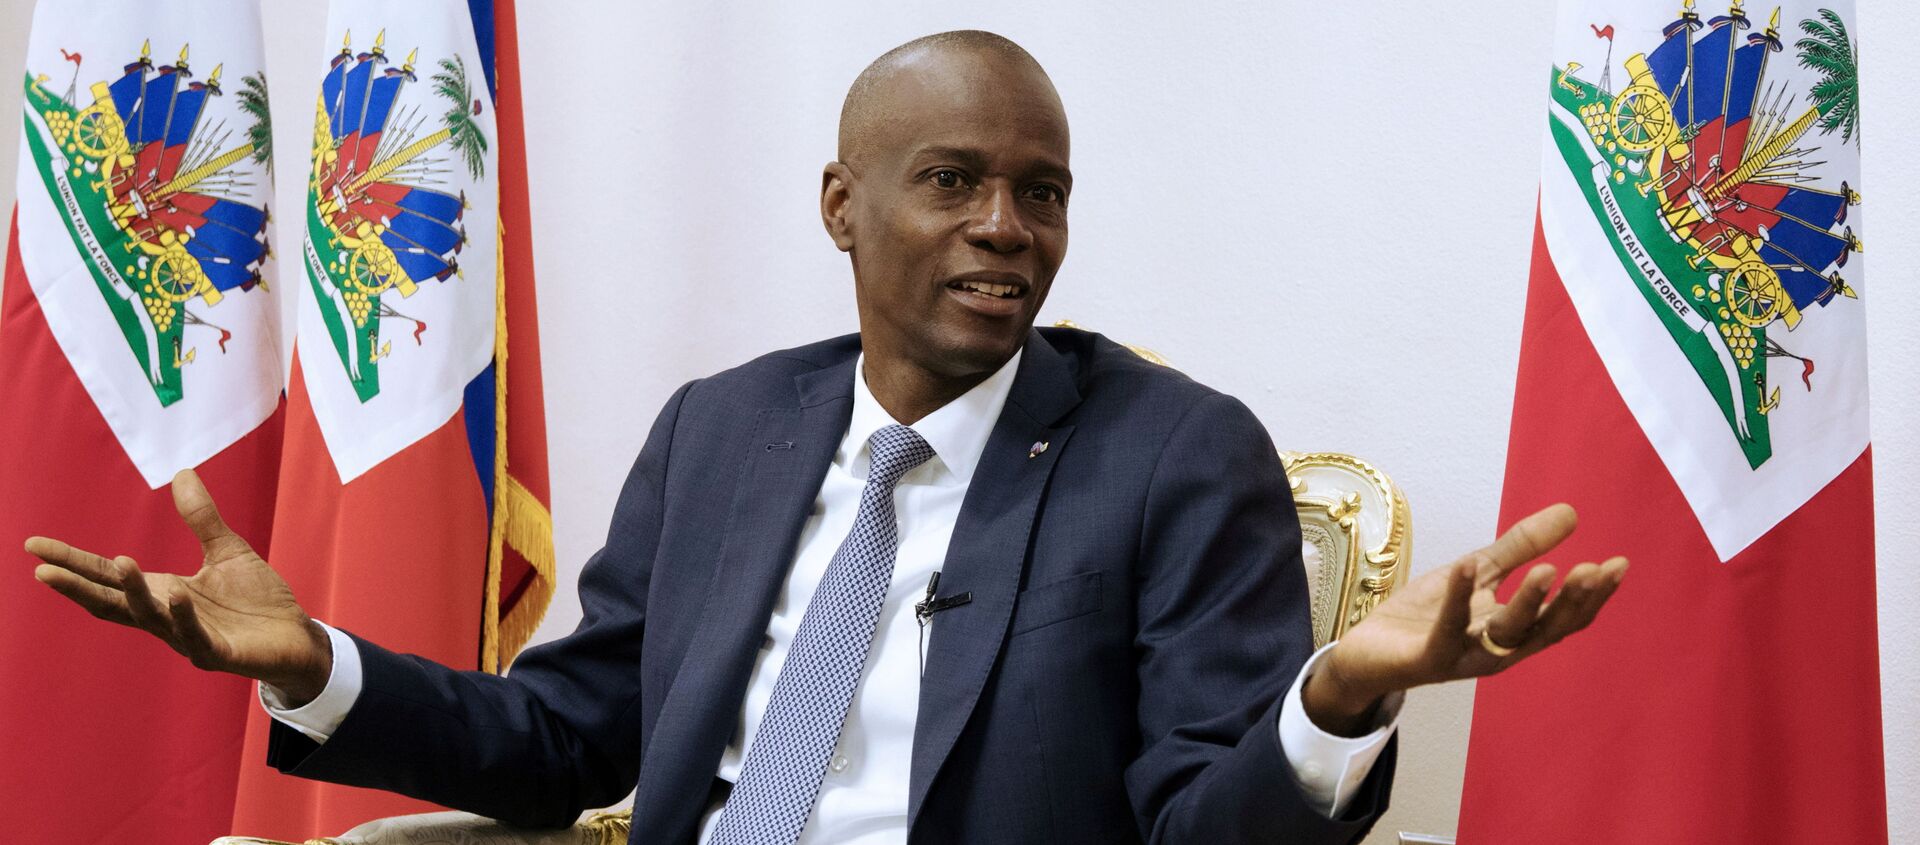 FILE PHOTO: Haiti's President Jovenel Moise speaks during an interview with Reuters at the National Palace of Port-au-Prince, Haiti January 11, 2020. REUTERS/Valerie Baeriswyl/File Photo - Sputnik International, 1920